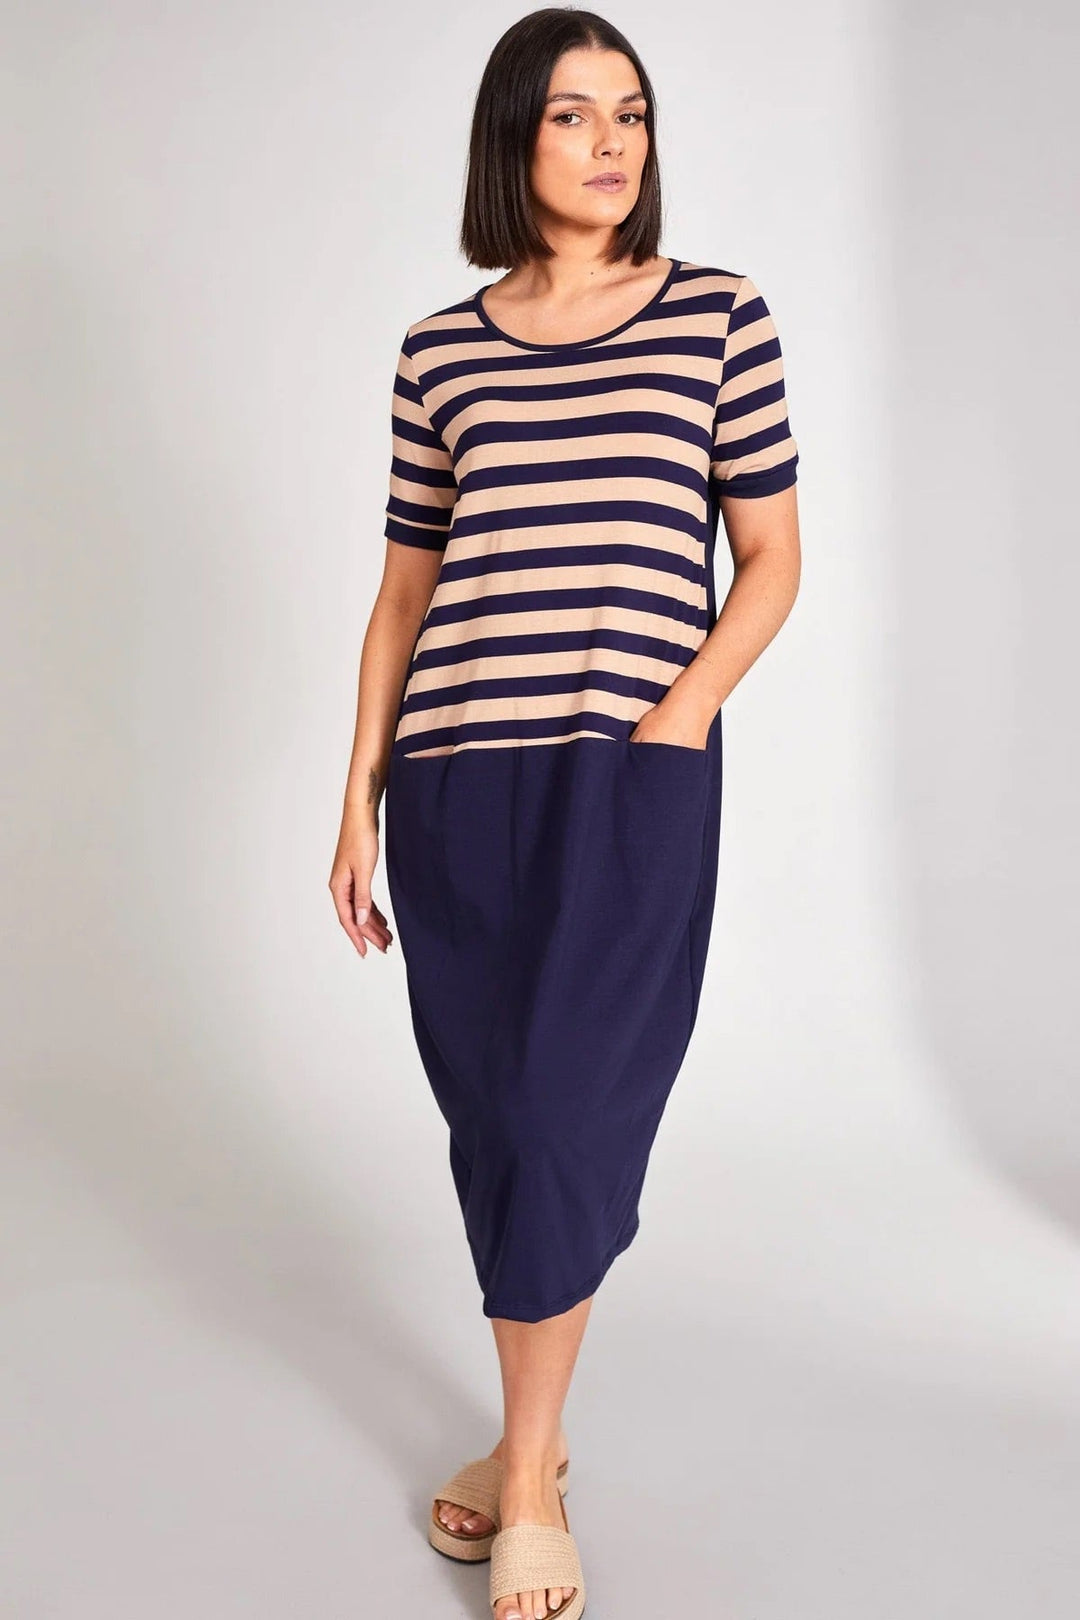 Peruzzi Stripe Dress With Contrast Pocket In Navy Multi - Crabtree Cottage